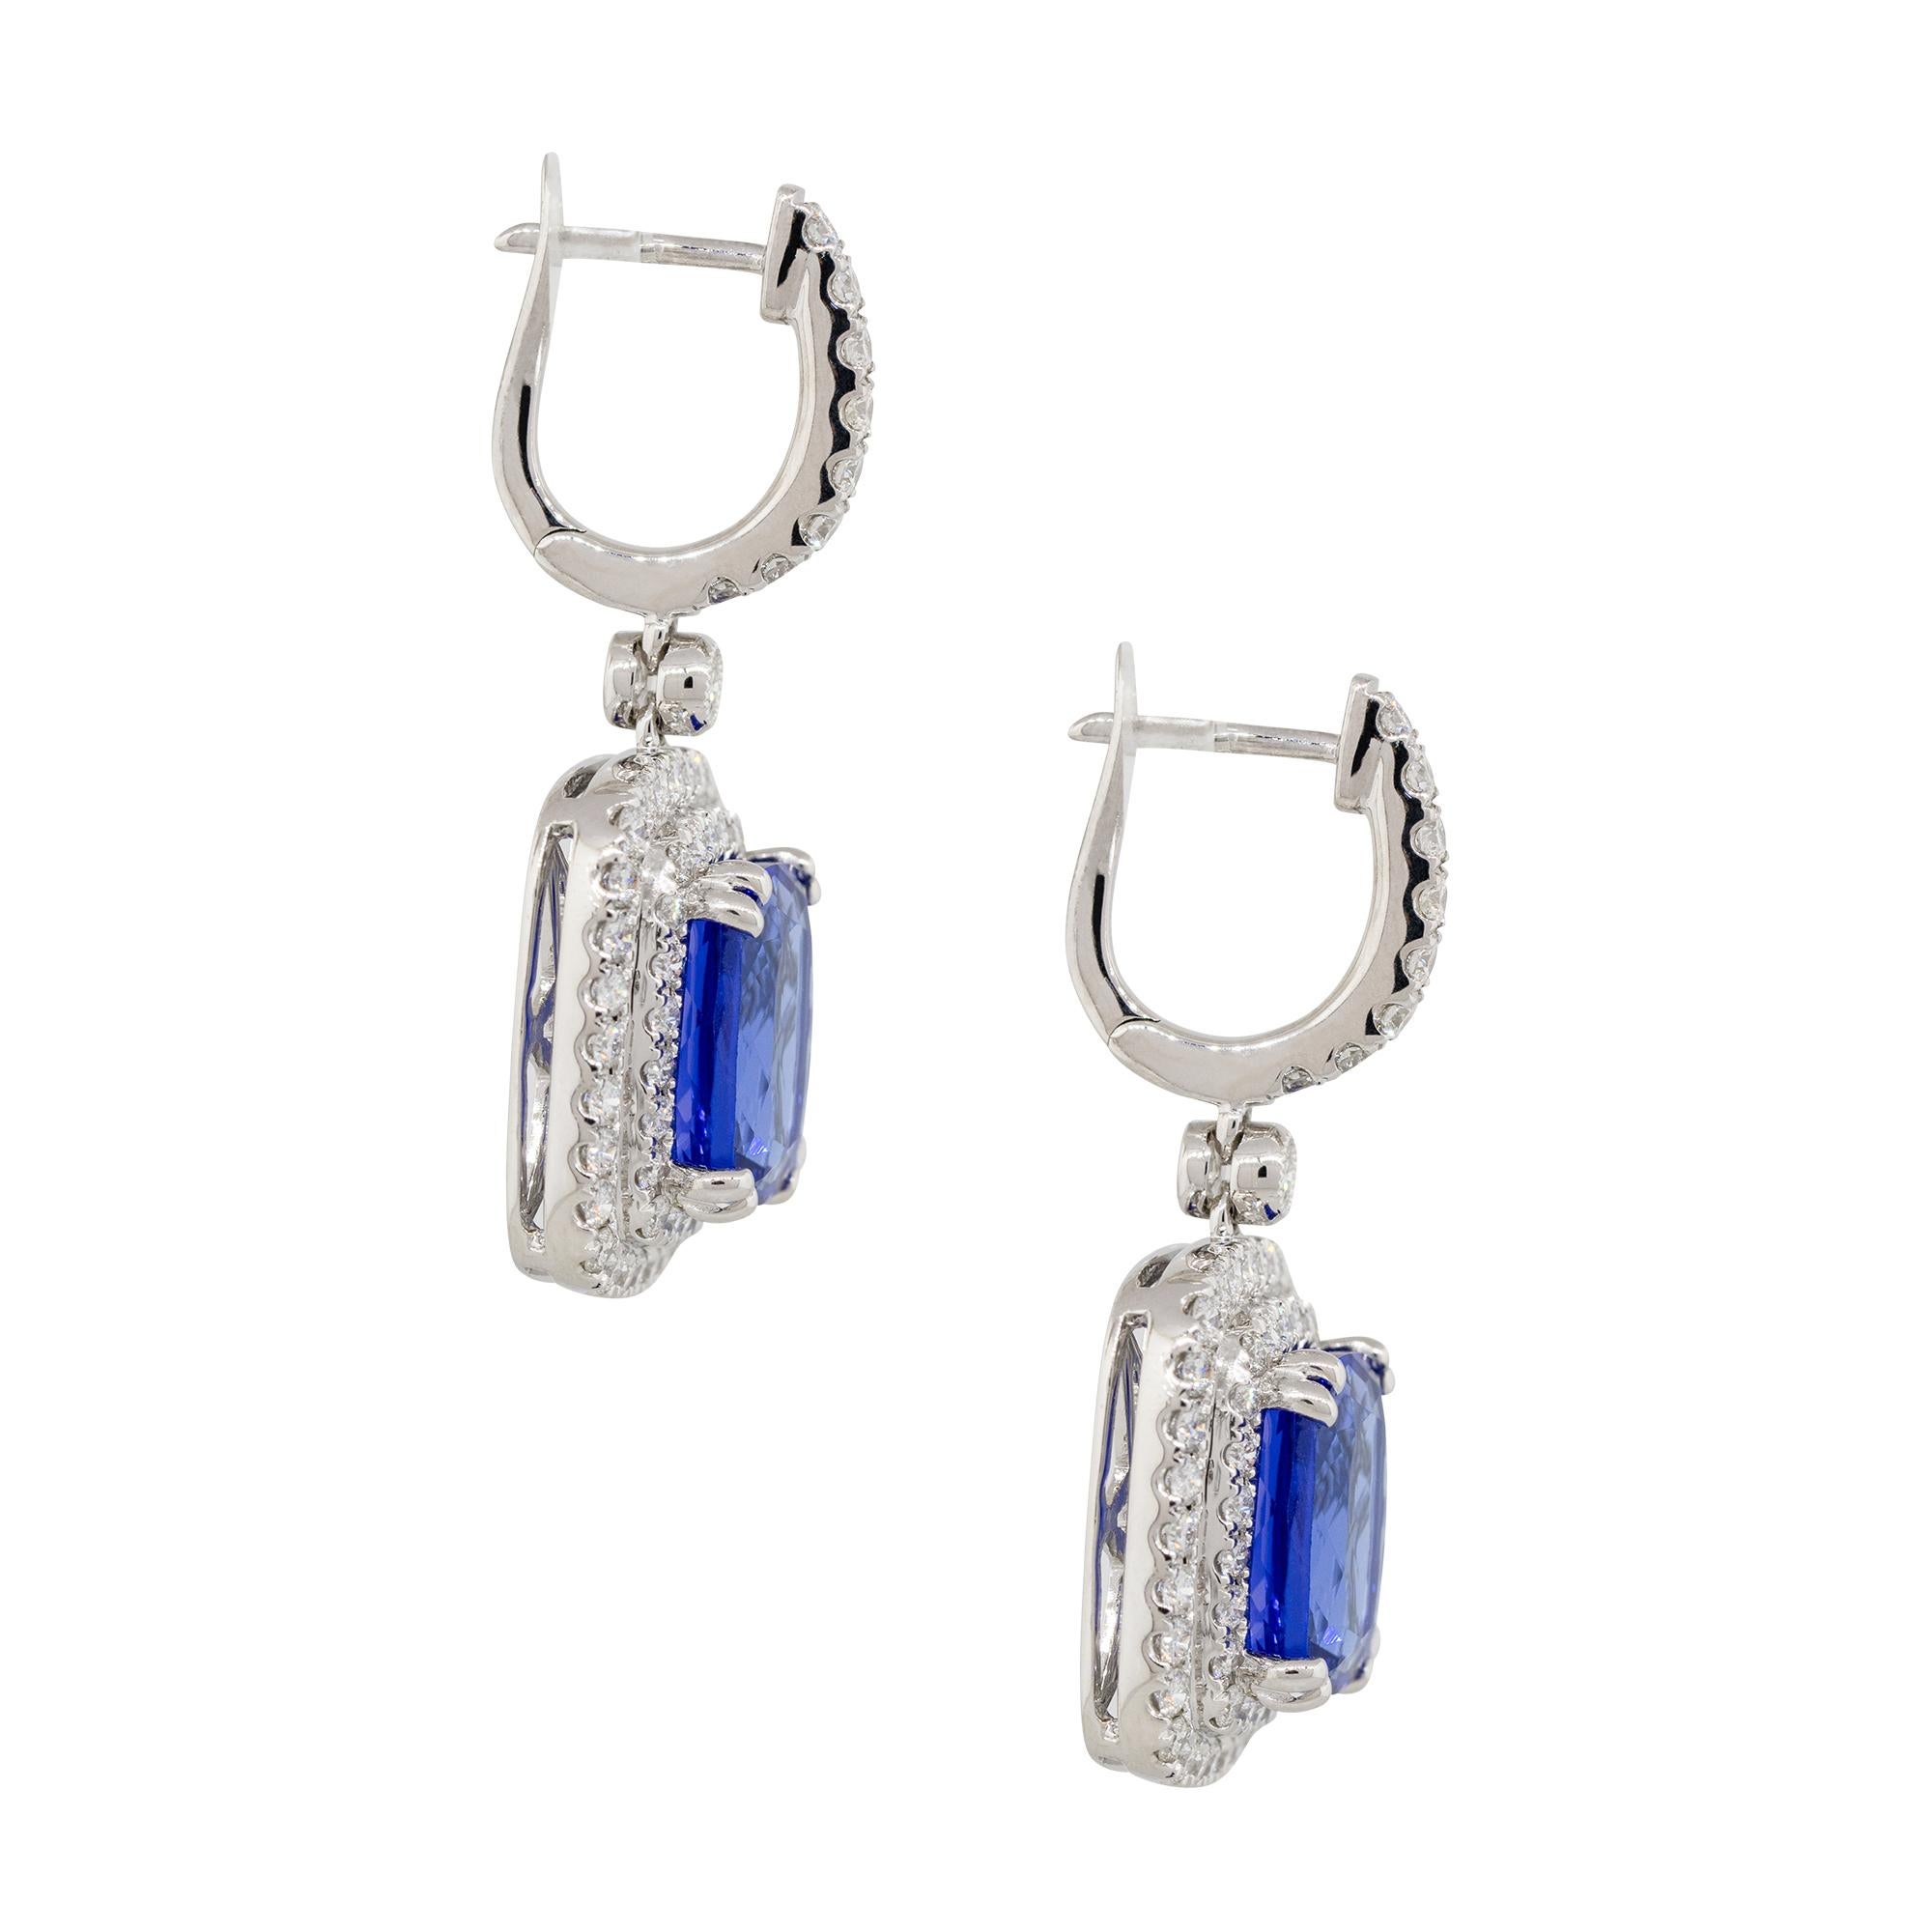 Material: 18k White Gold
Style: Tanzanite Earrings With Diamond Halo
Diamond Details: Approx. 1.62ctw of round cut diamonds. Diamonds are G/H in color and VS in clarity
Gemstone Details: Approx. 6.50ctw of cushion cut Tanzanite gemstones
Earring